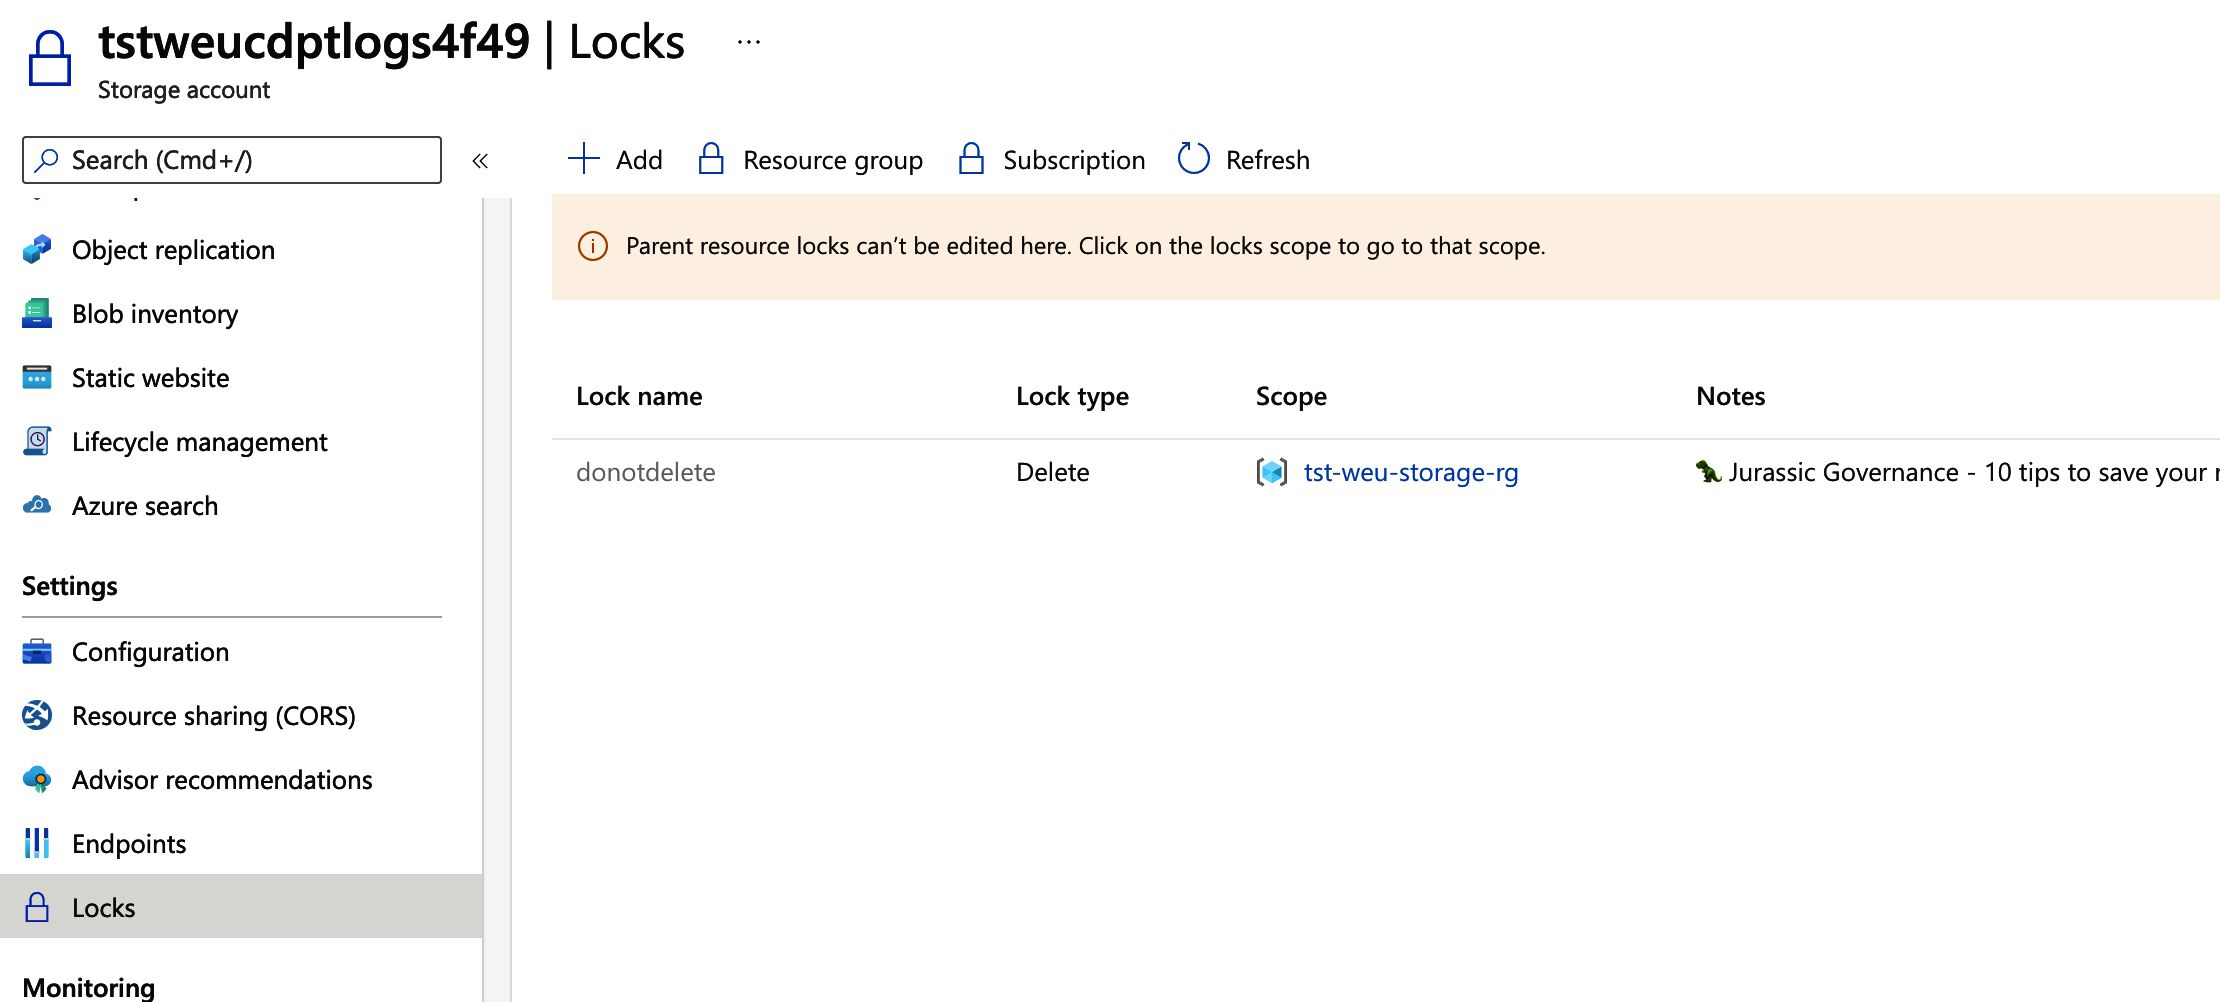 Image of the storage account locks settings view in the Azure Portal, a do not delete entry is listed. This entry its scope set to ’tst-weu-storage-rg’. A message is also visible above the locks list, it reads: “Parent resource locks can’t be edited here. Click on the locks scope to go to that scope.”